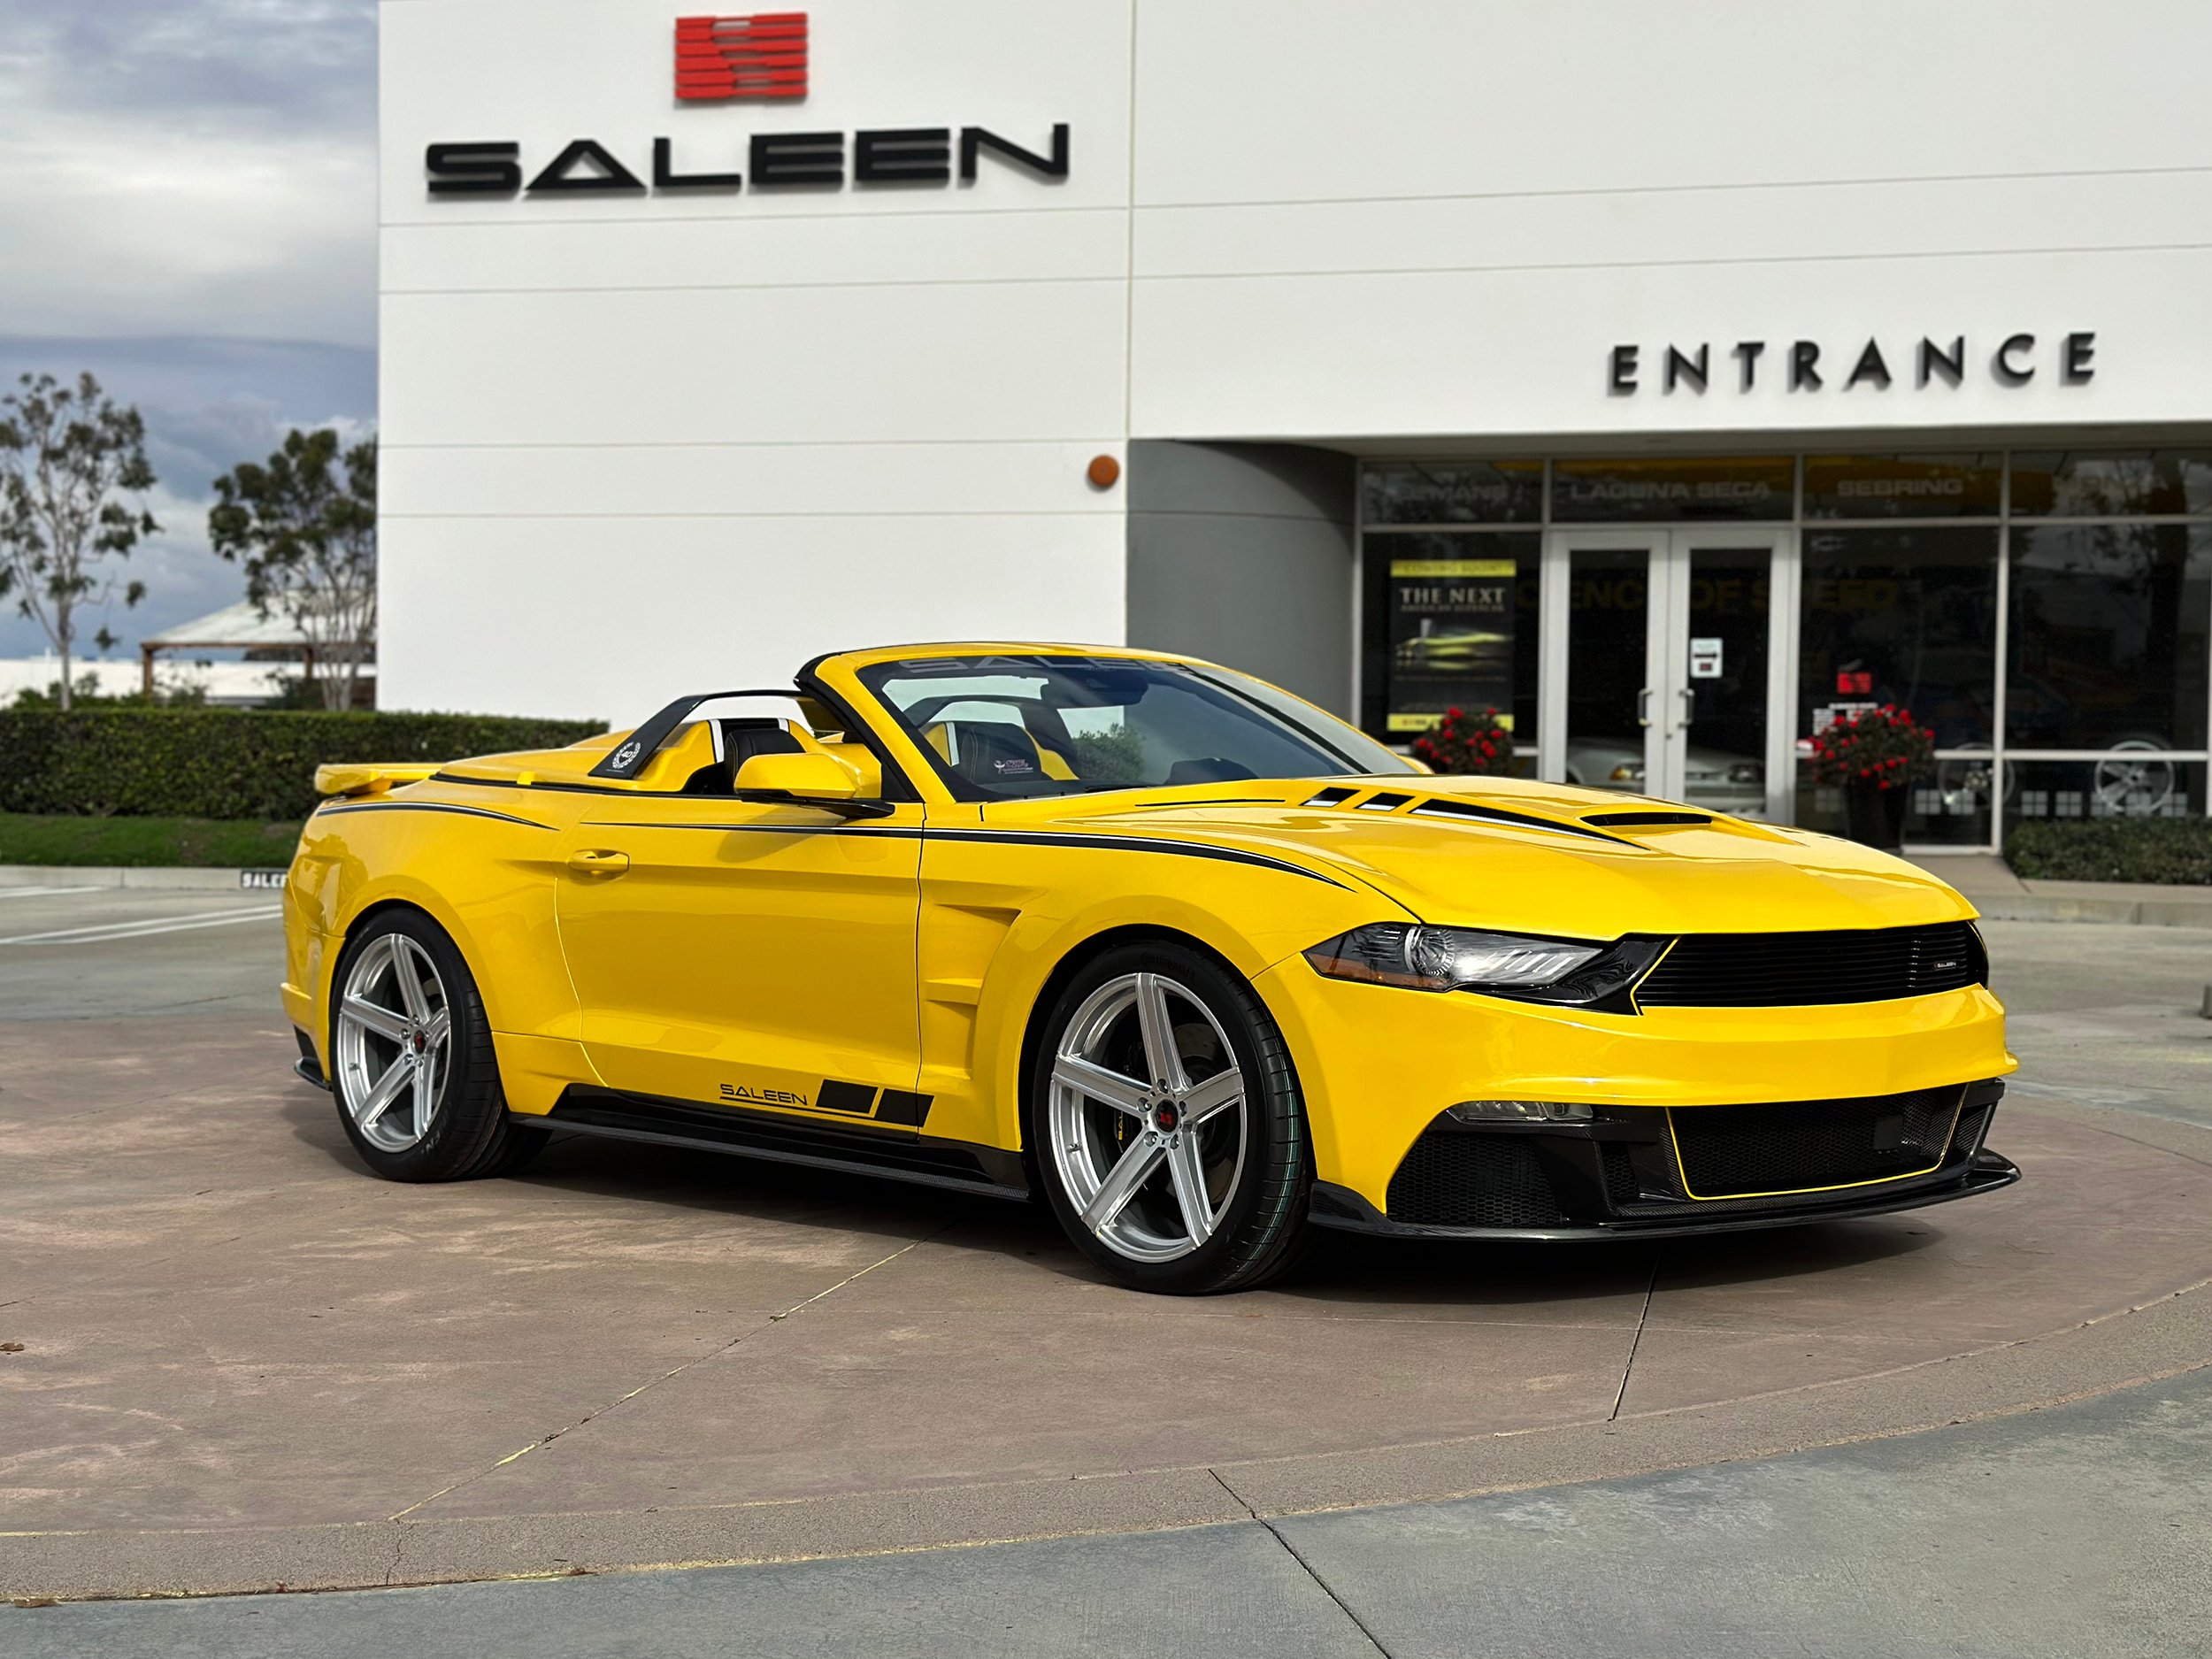 Enter To Win A Special Edition Saleen SA-40 From Cruise For A Cause